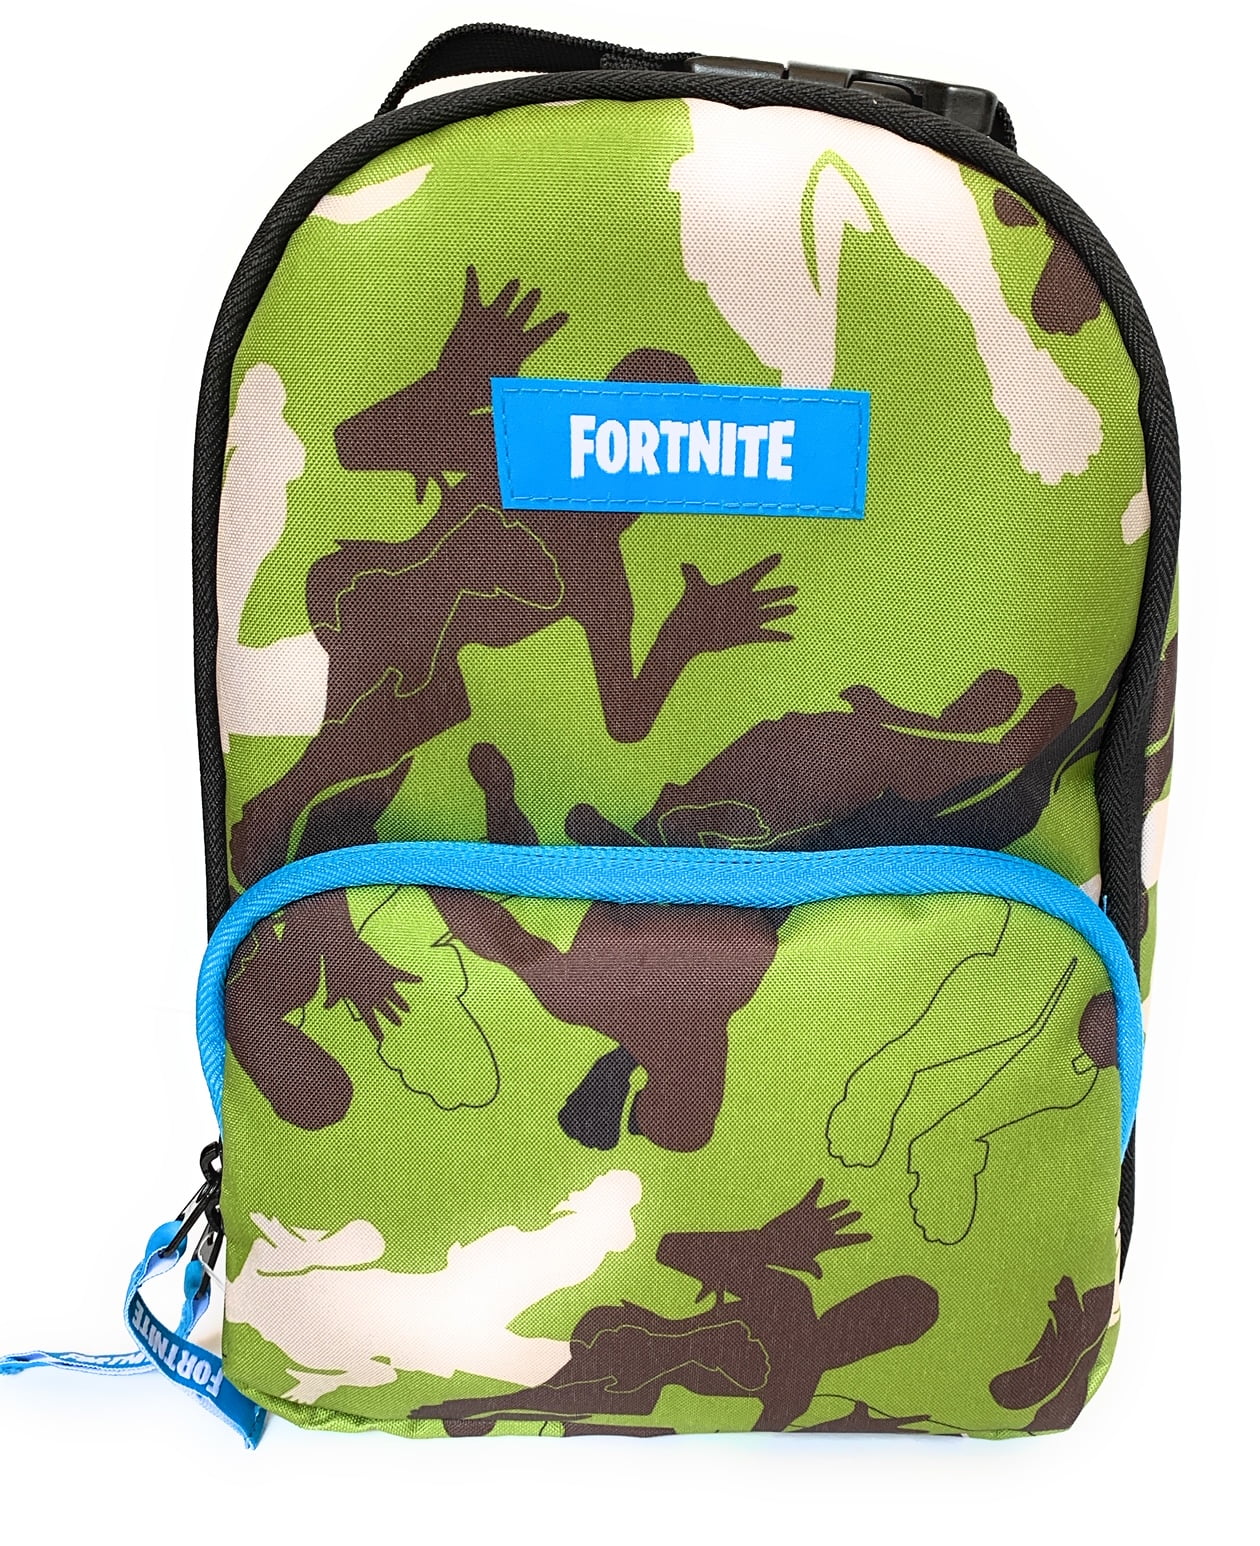 Fortnite Kids Profile Lunch Box Kit Blue with Pink Llama 